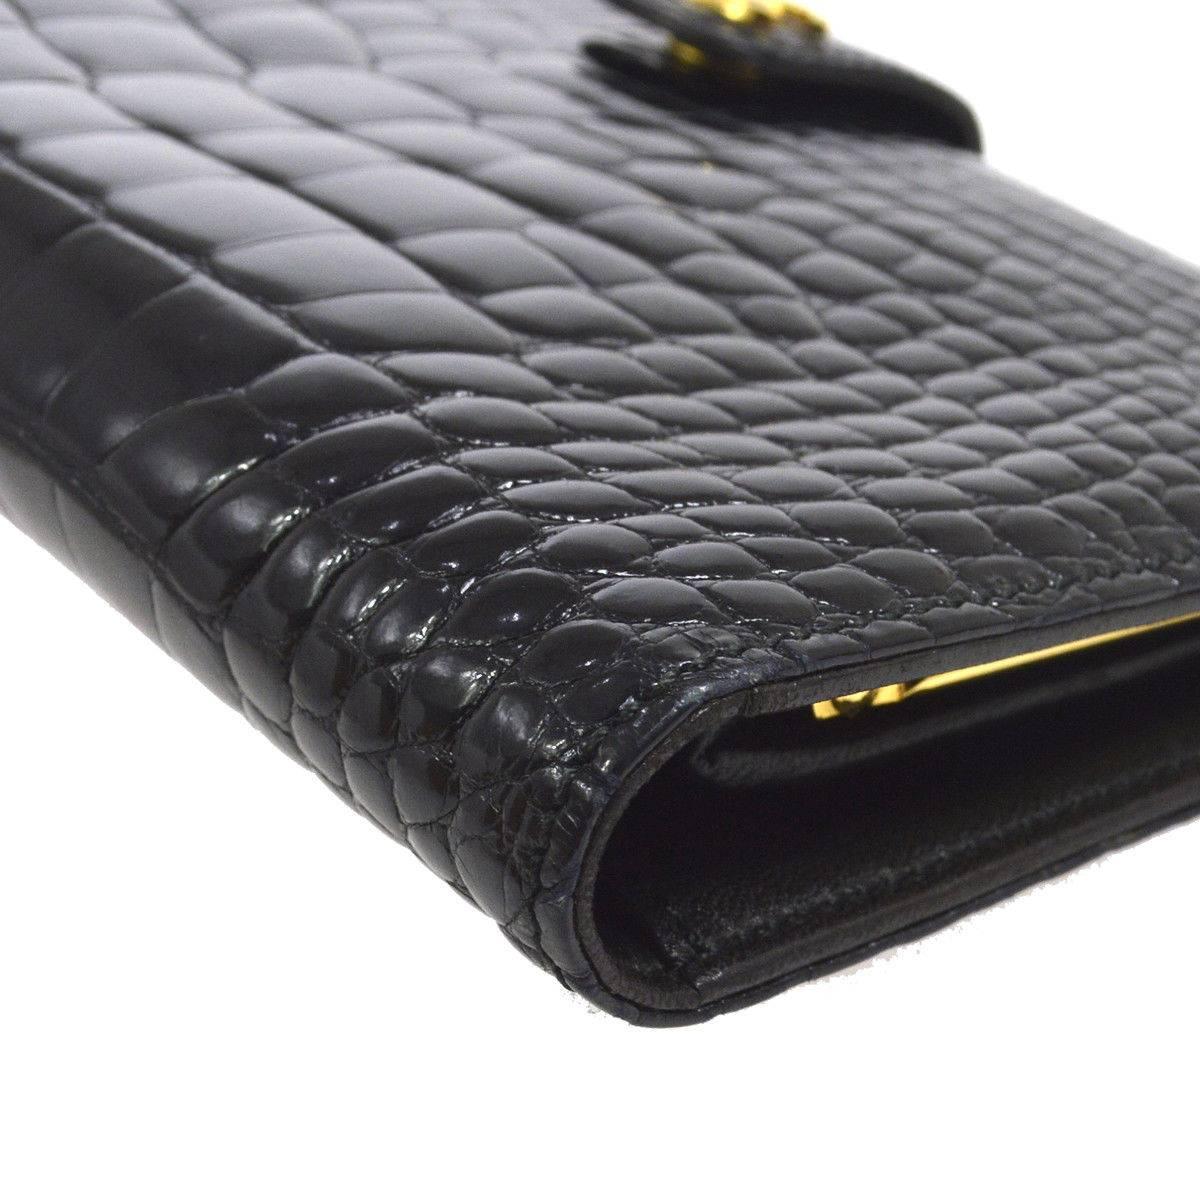 Women's Chanel Rare Black Crocodile and Caviar LeatherEvening Gold Clutch Wallet in Box